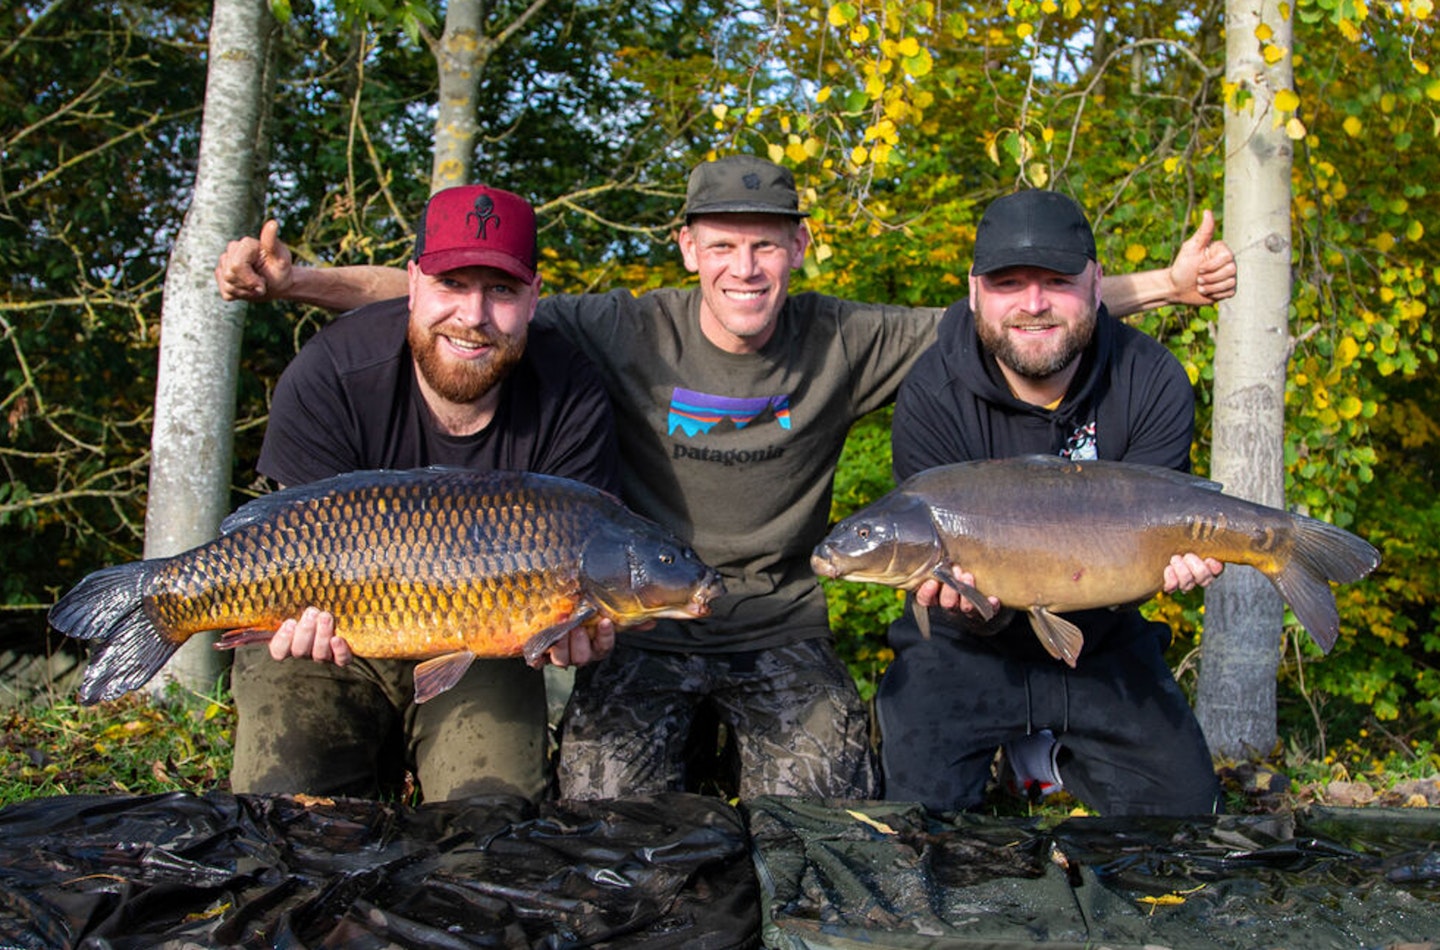 Alan Blair sees an angling renaissance taking place, embracing the positives of technology